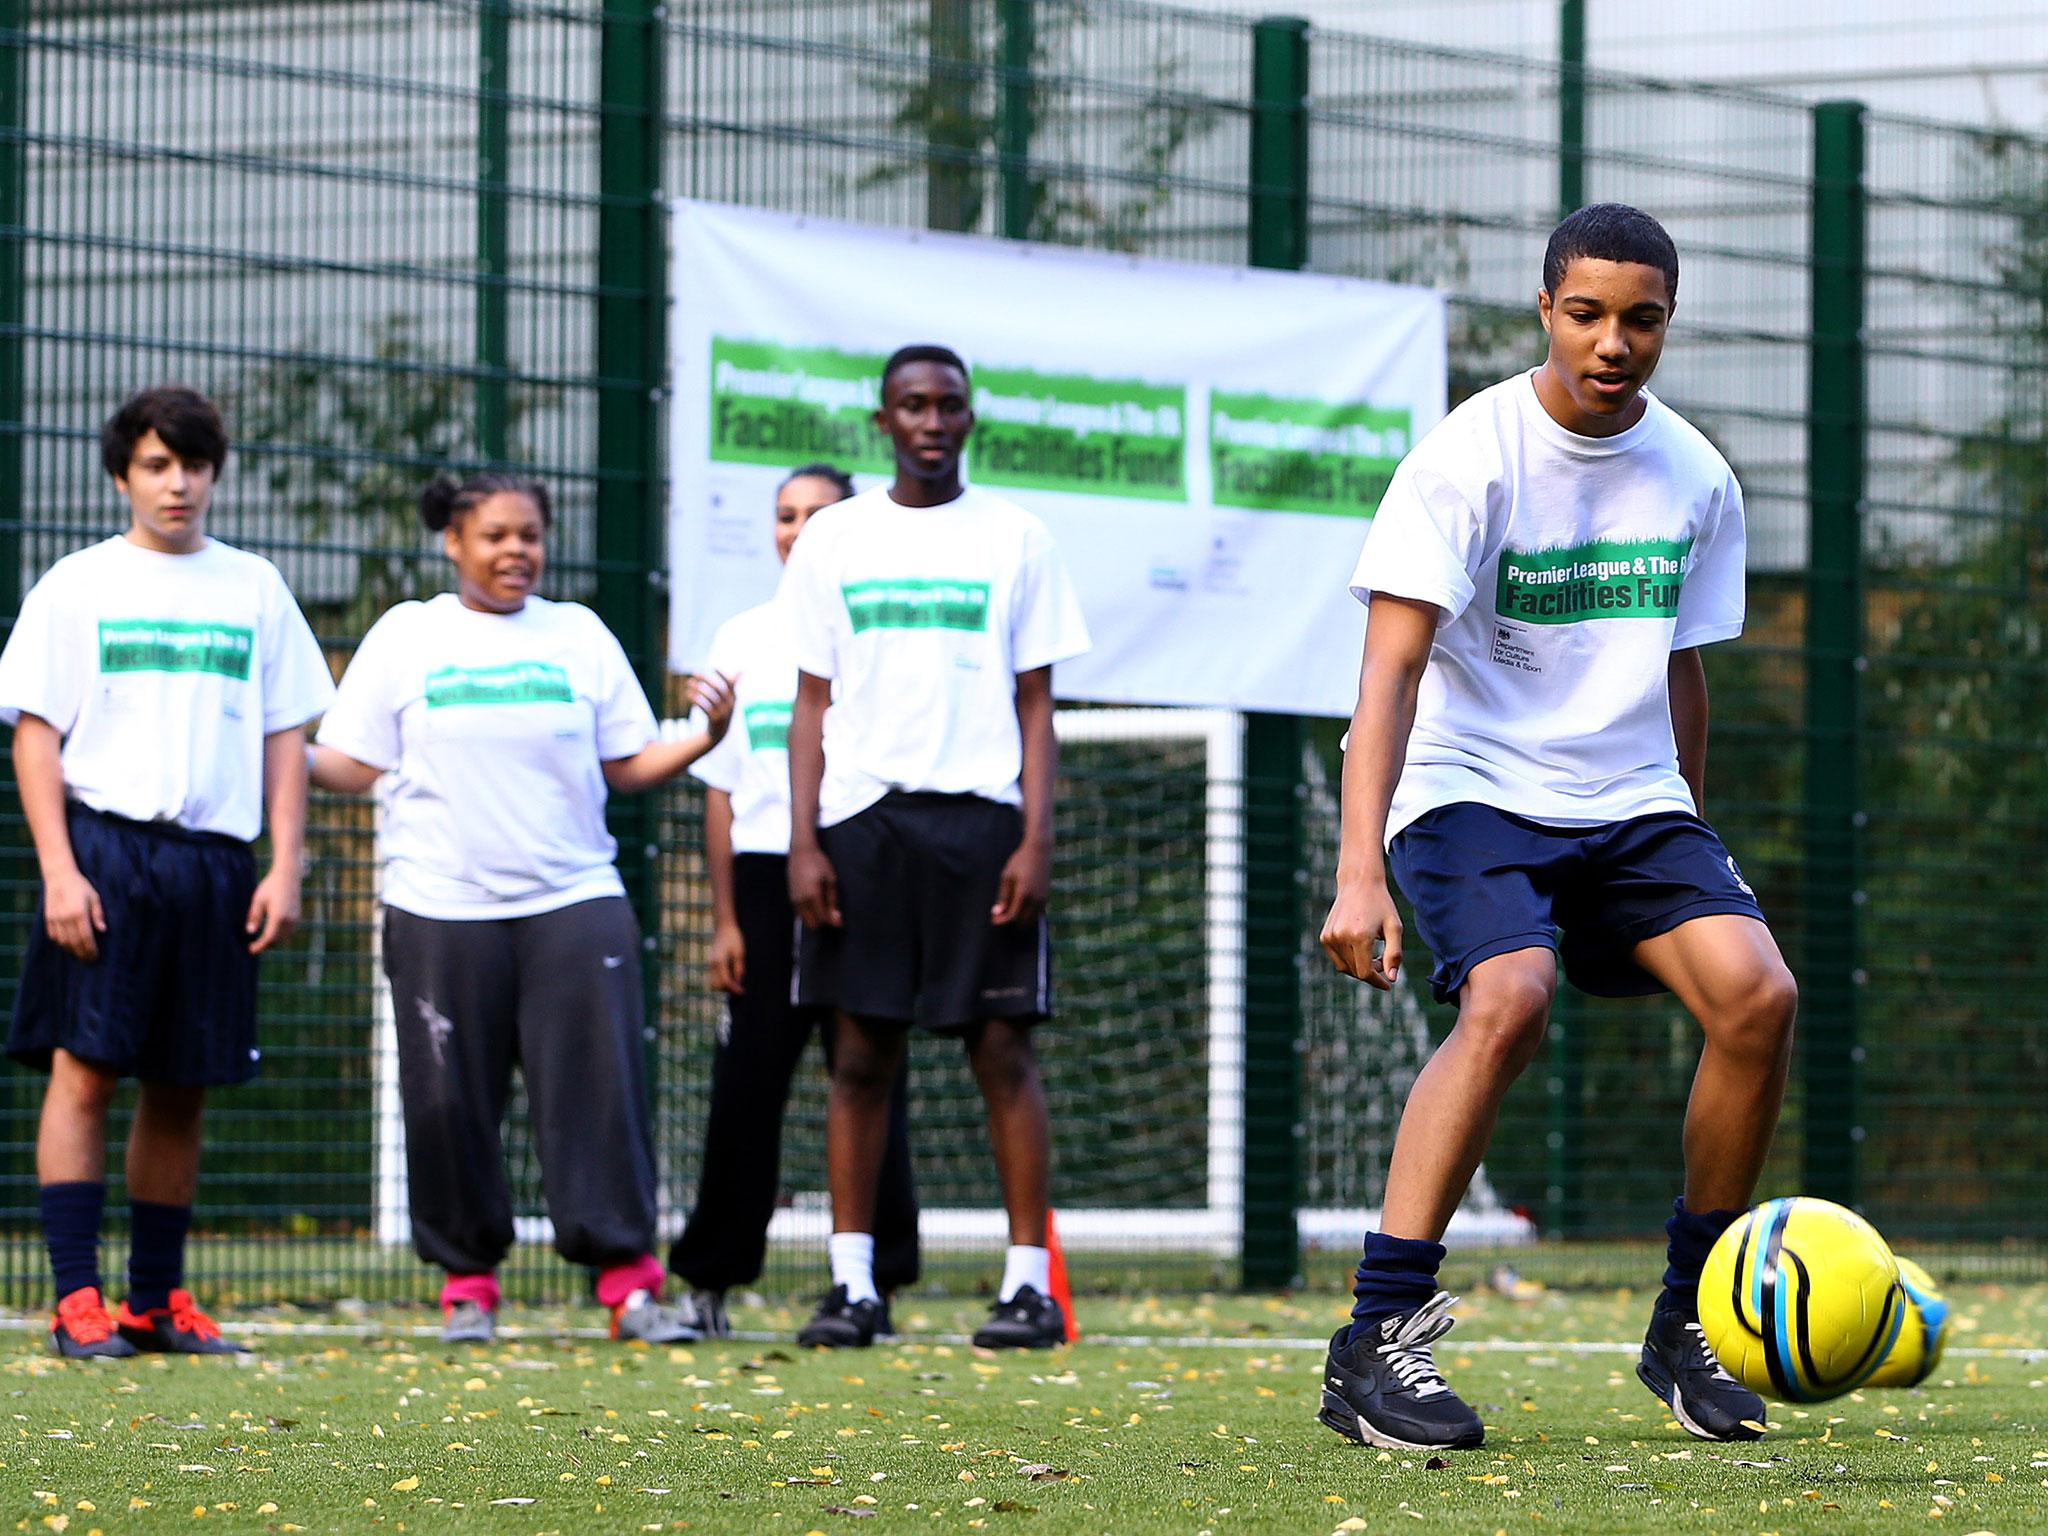 The FA – maligned though it so very often is – has been diligent in its work to safeguard children